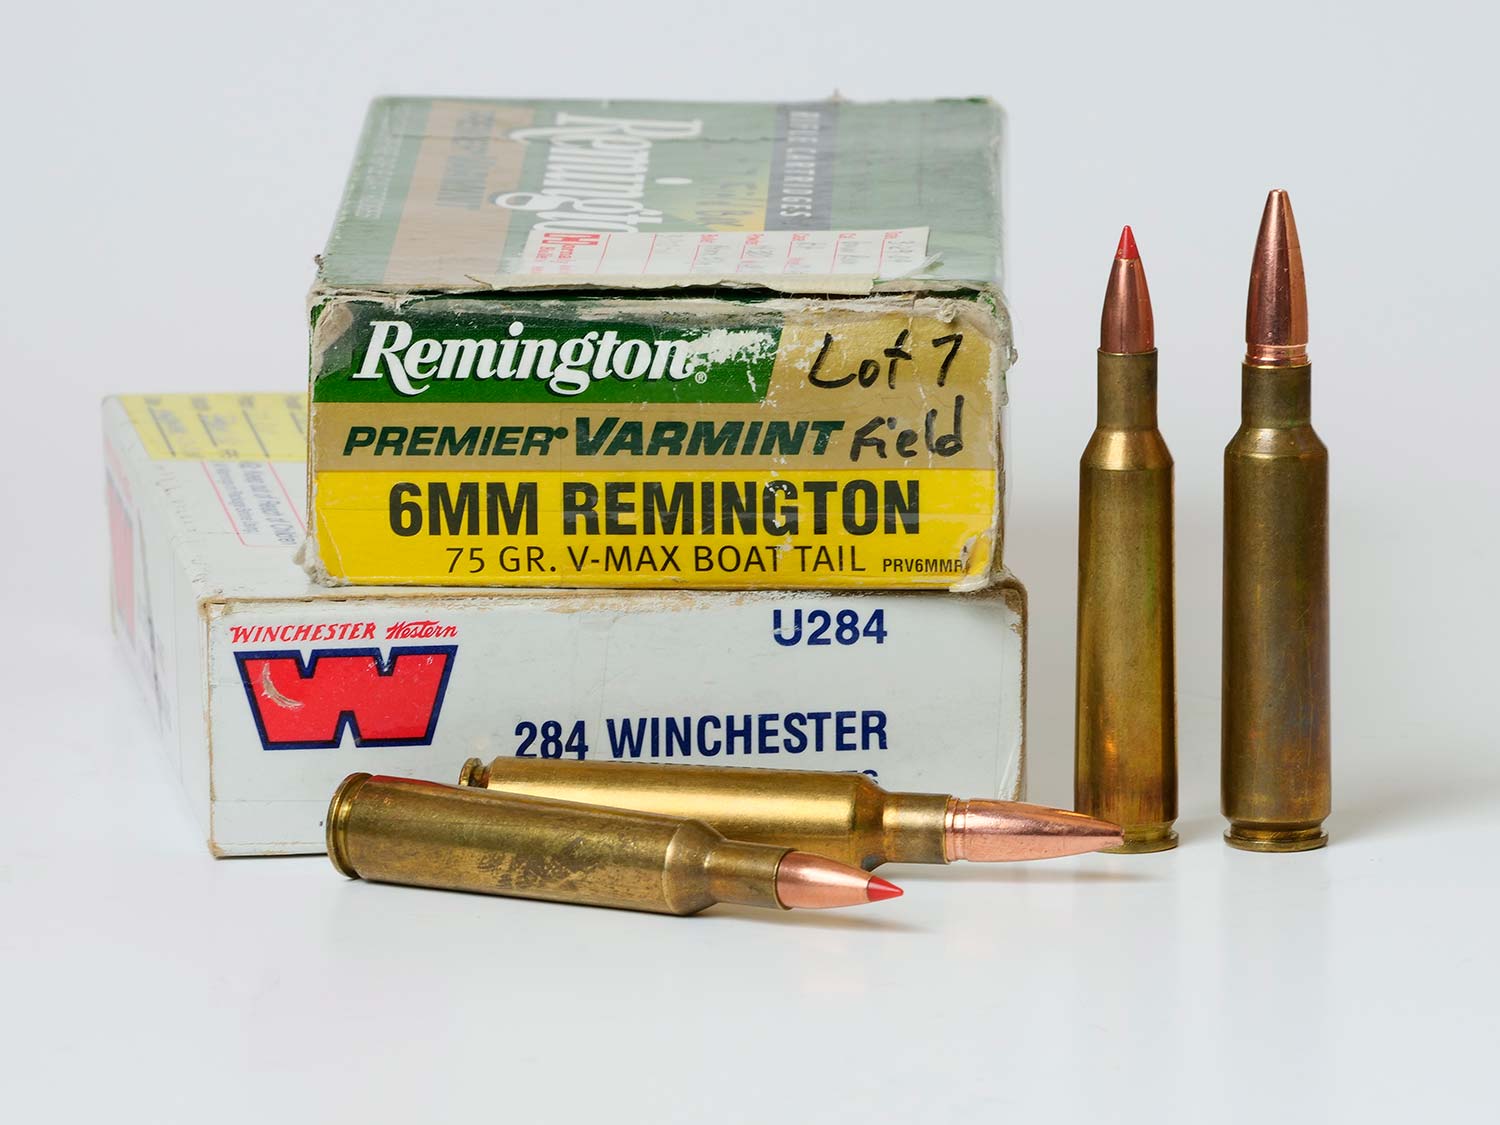 Two boxes of rifle ammunition on a white table next to four rifle cartridges standing up or on their side.